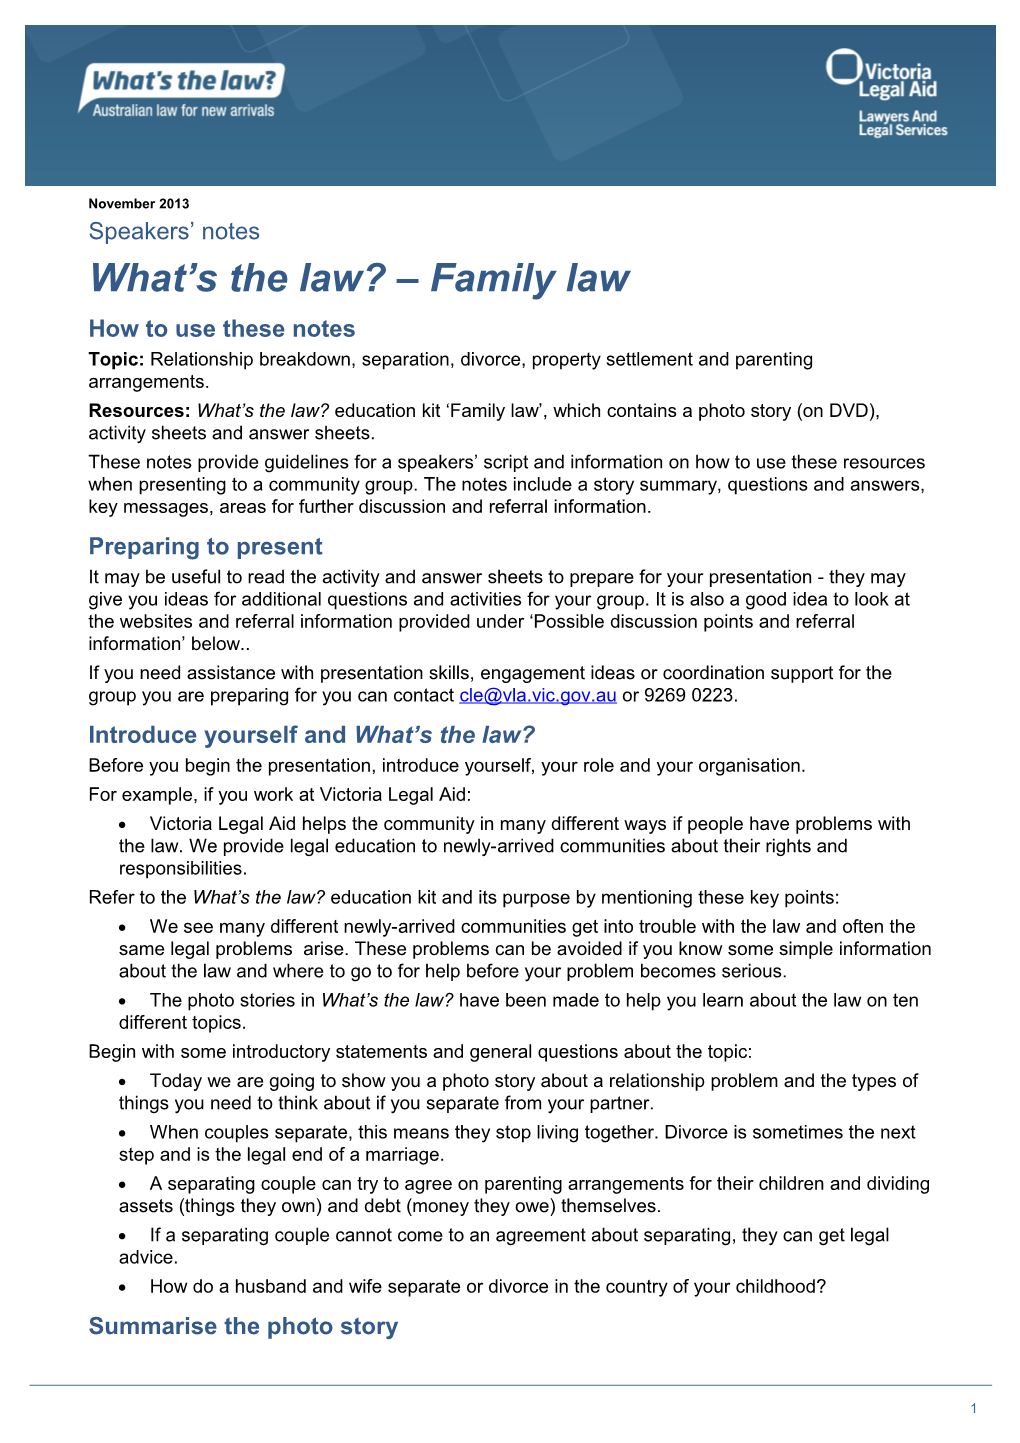 Speakers' Notes What's the Law Family Law